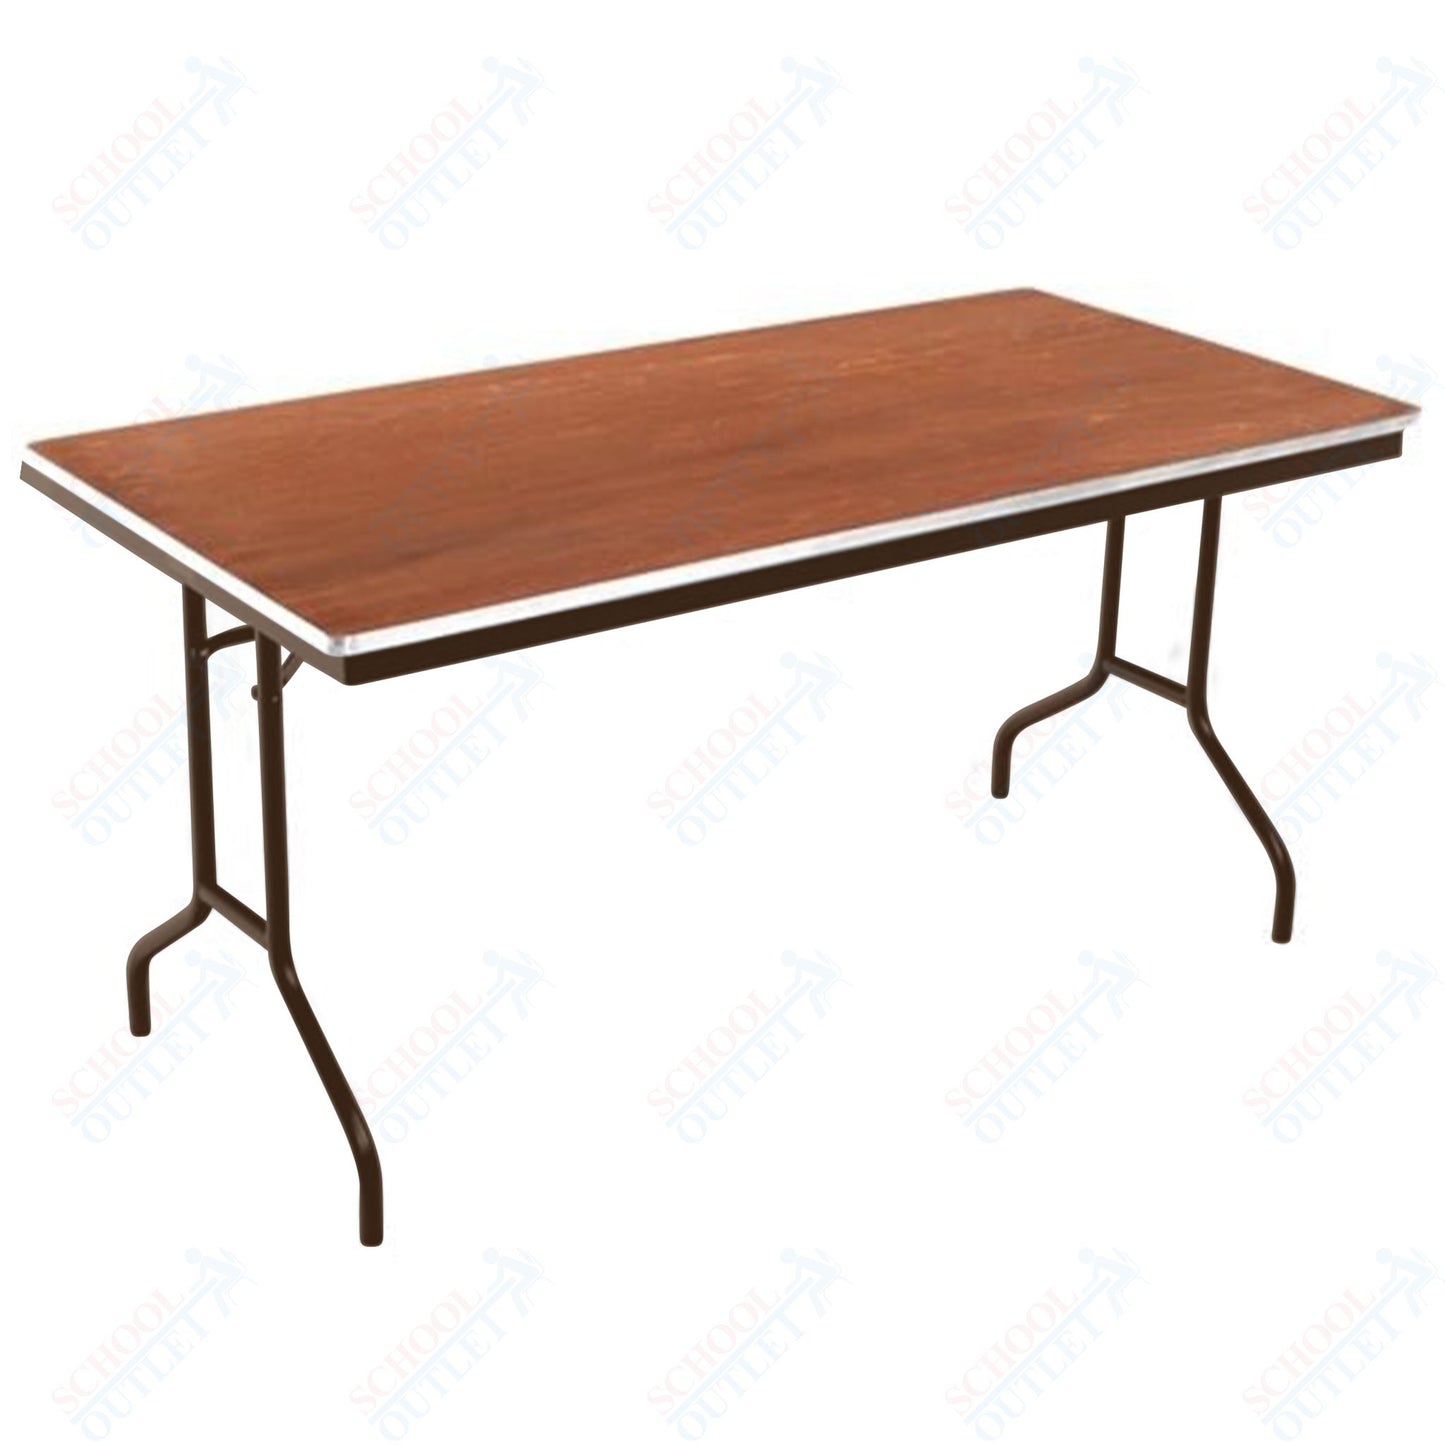 AmTab Folding Table - Plywood Stained and Sealed - Aluminum Edge - 18"W x 72"L x 29"H  (AmTab AMT-186PA)